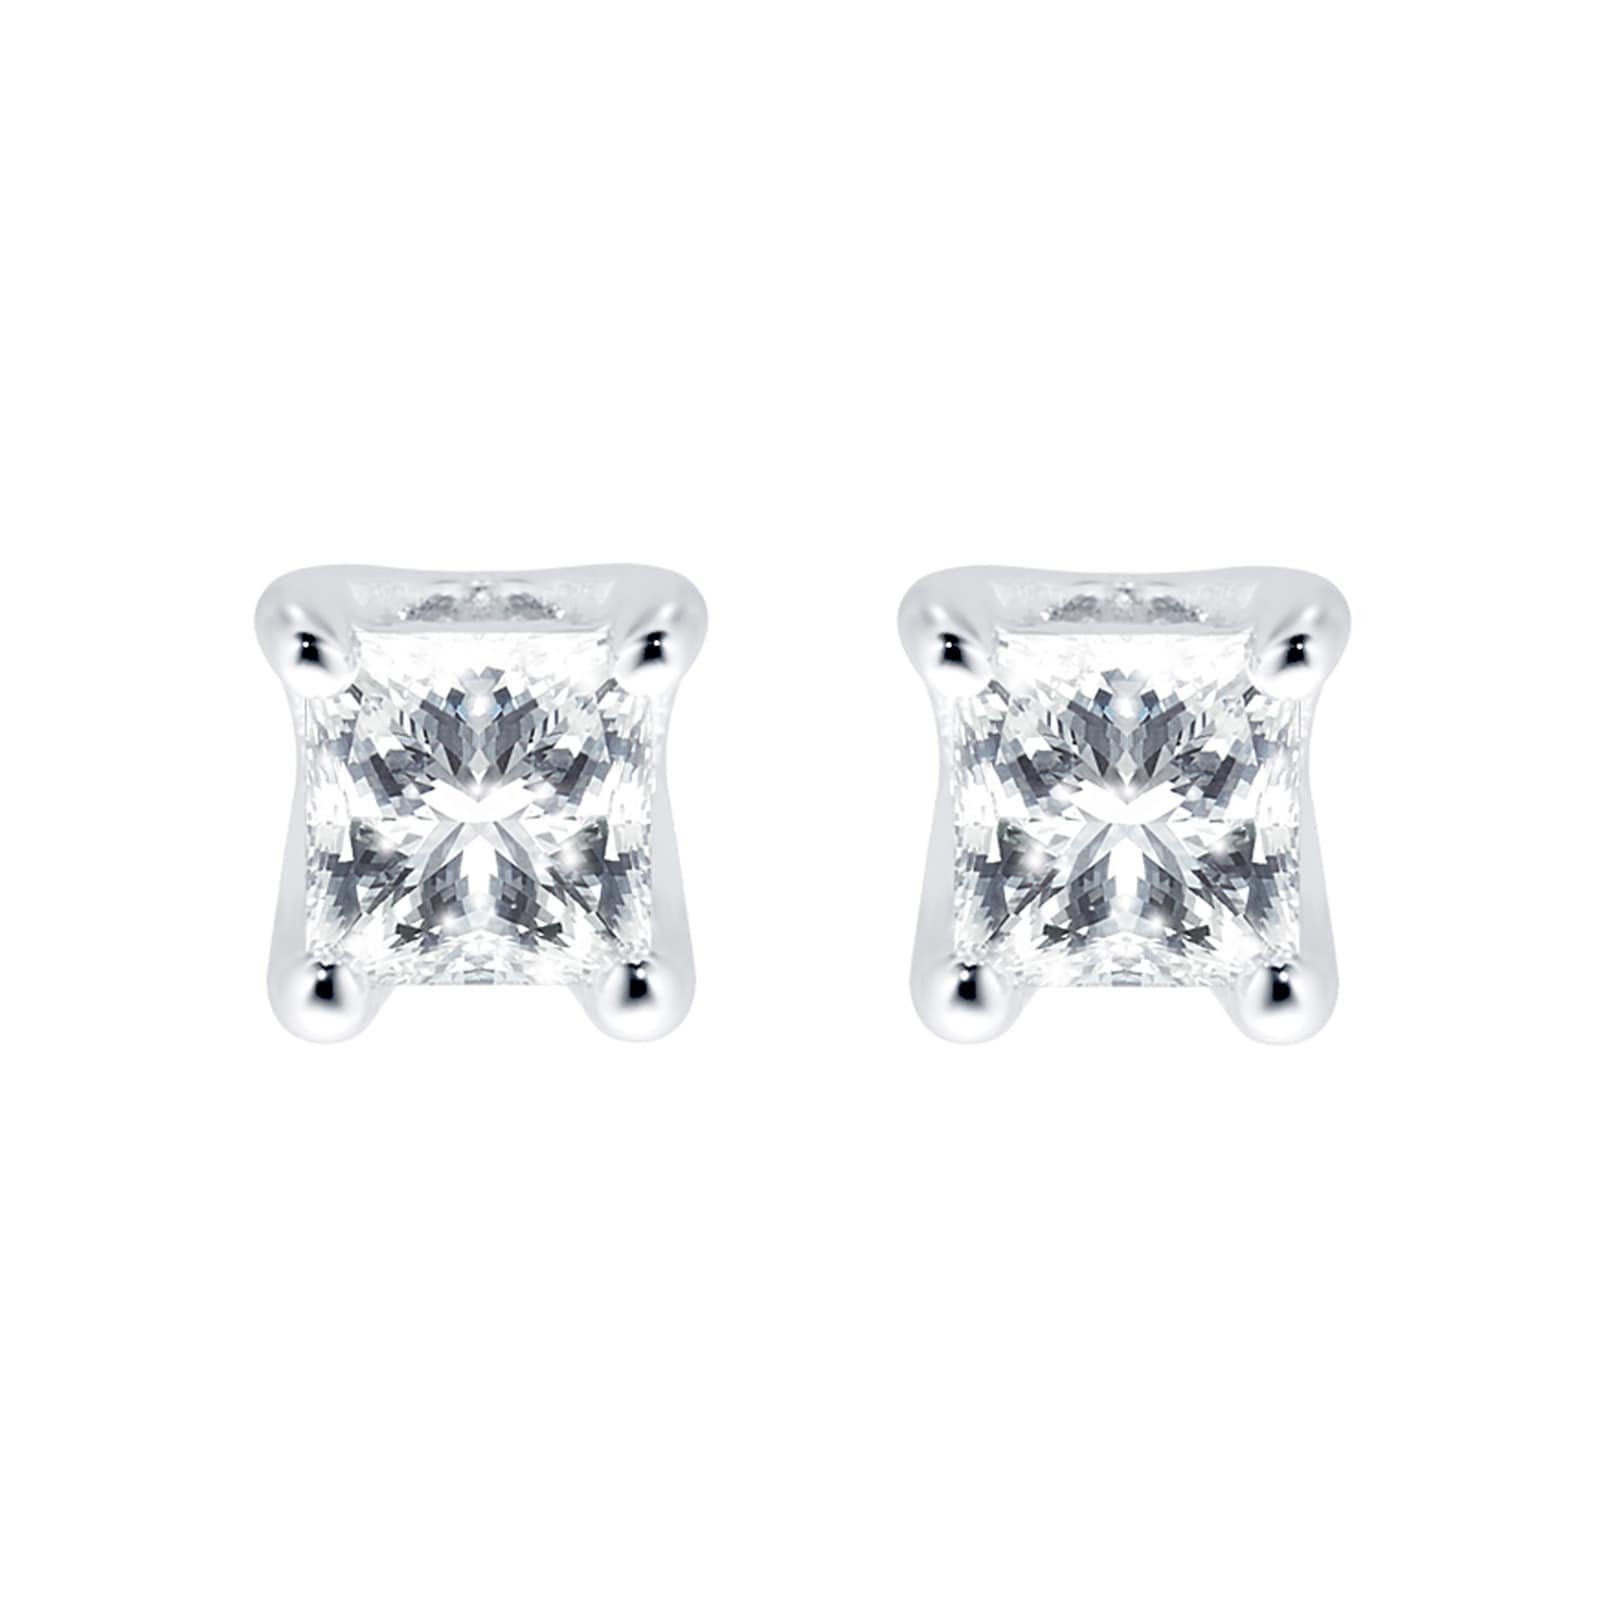 9ct White Gold 0.25ct 4 Claw Goldsmiths Brightest Diamond Earrings